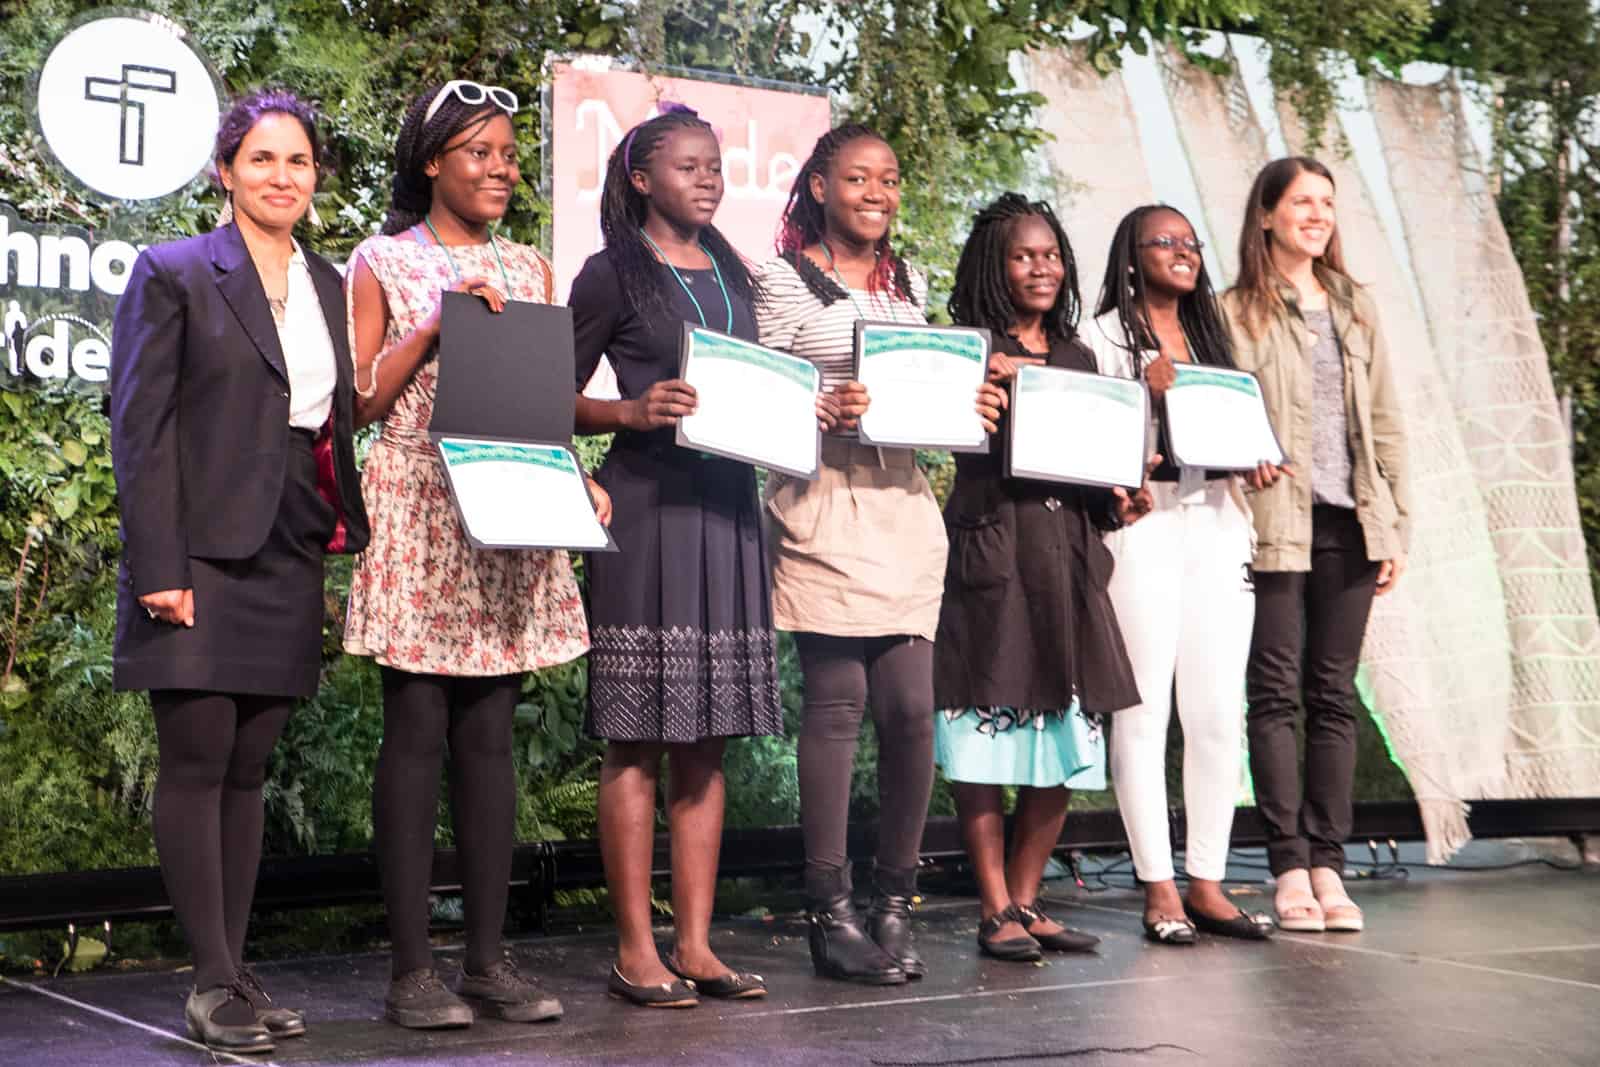 FGM App: How 5 girls are restoring hope with an app to fight FGM